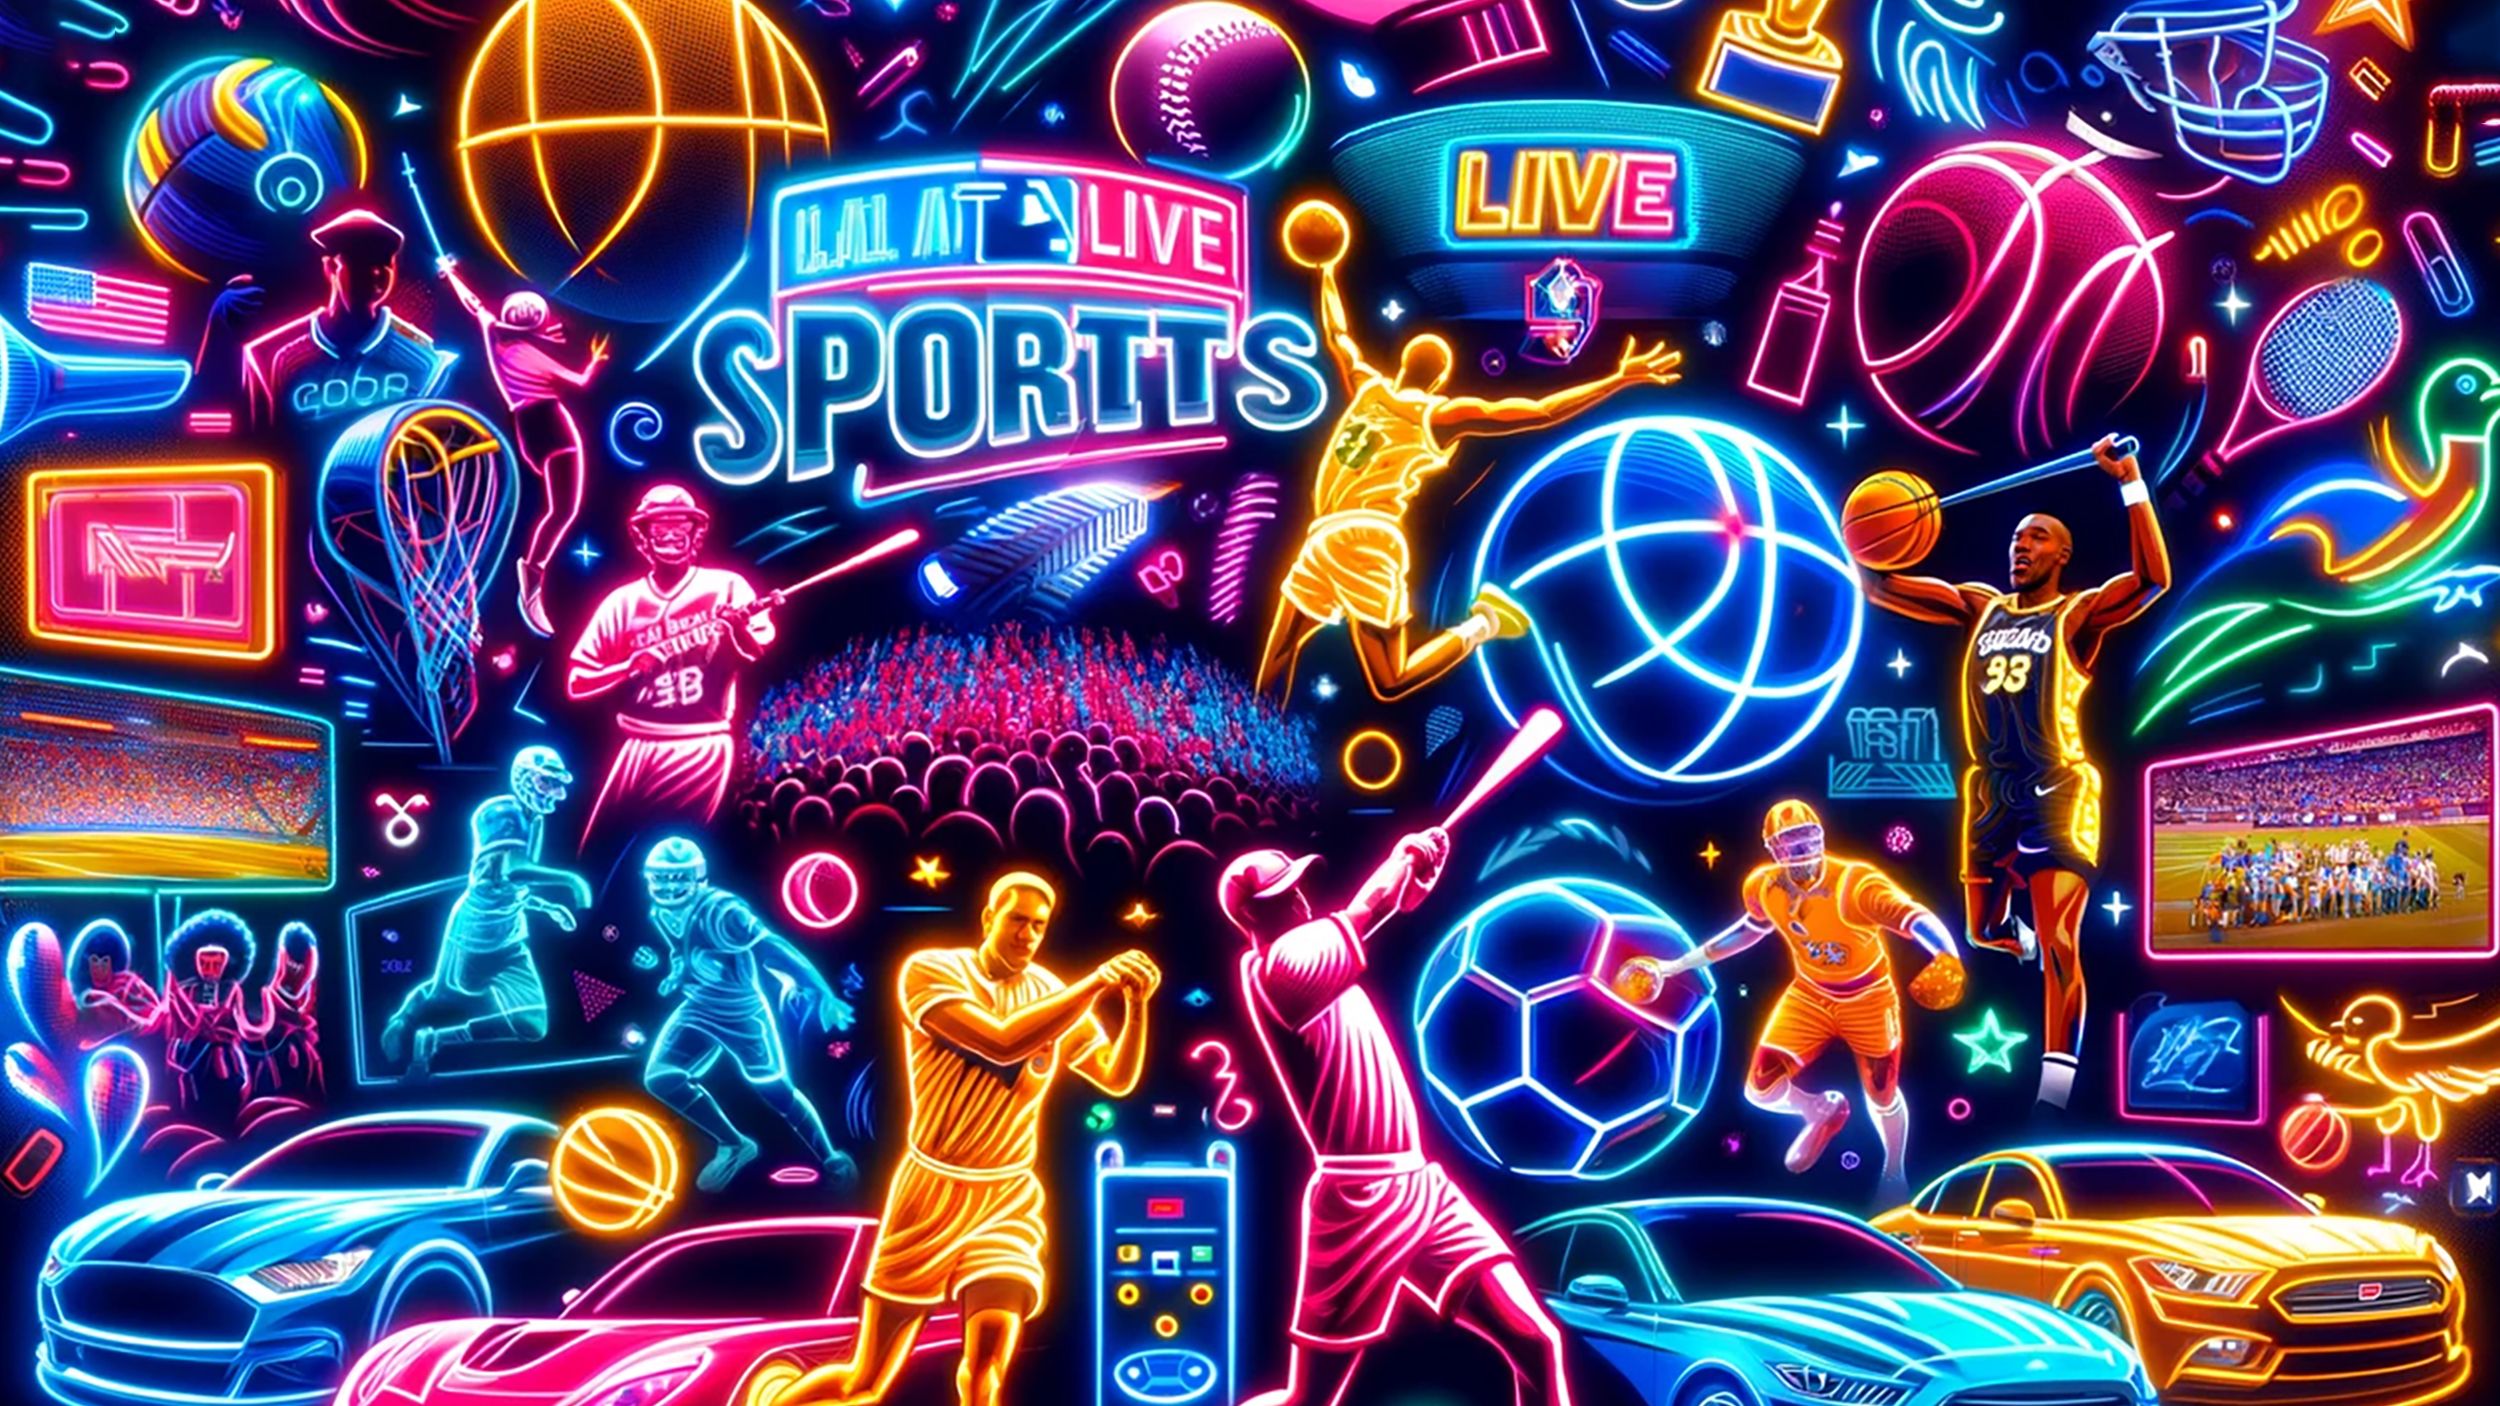 Vibrant neon-themed collage that encapsulates the spirit of live sports broadcasting across various sports, emphasizing the excit